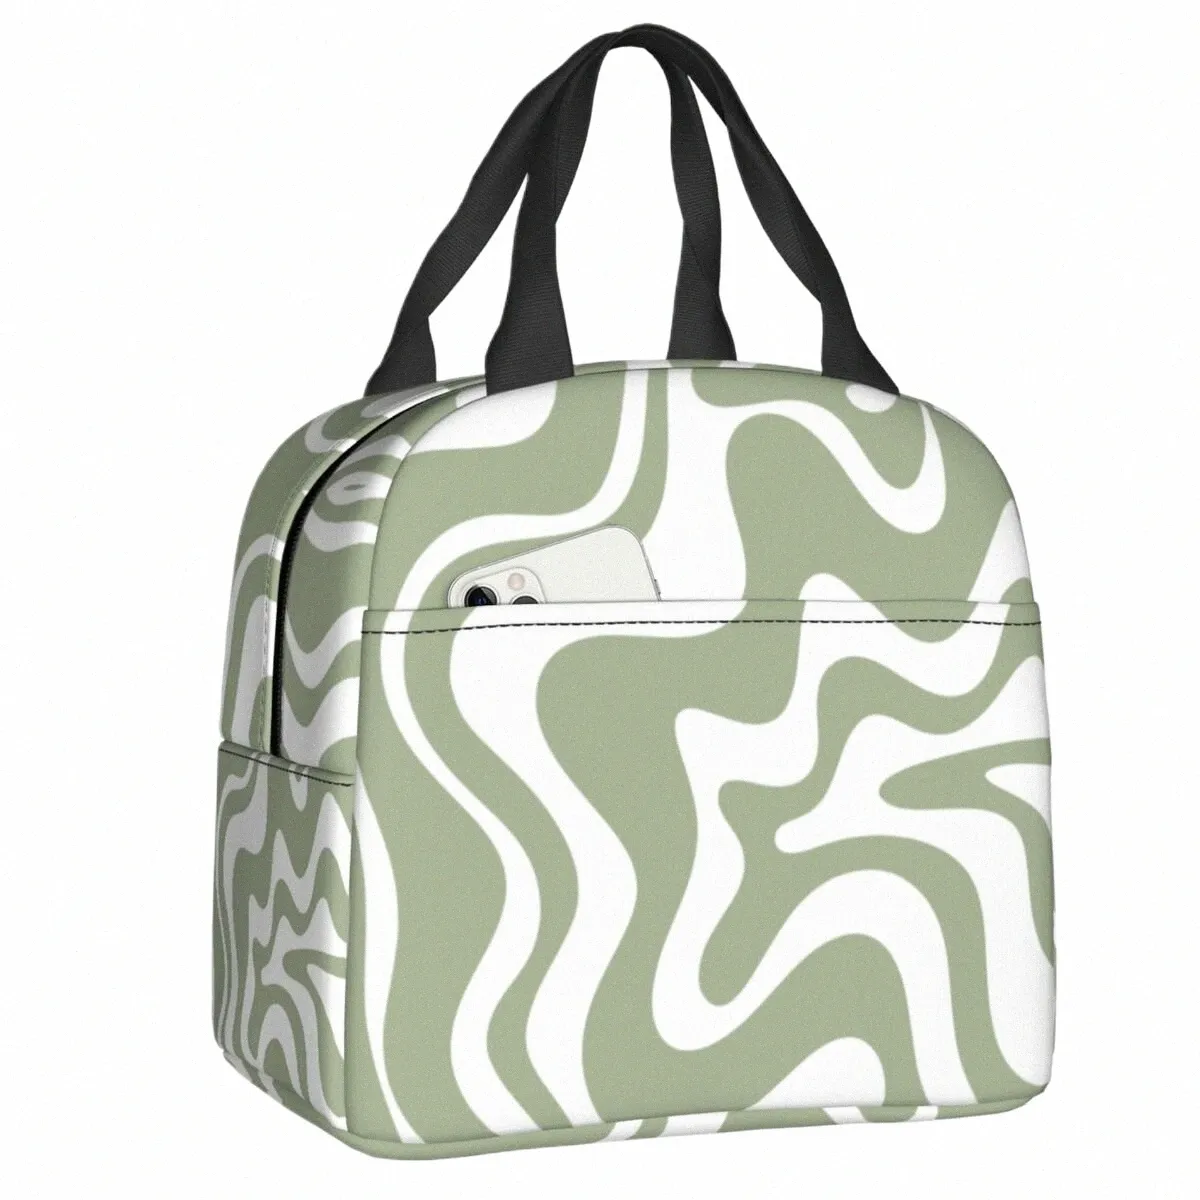 liquid Swirl Abstract Pattern In Sage Green Insulated Lunch Bag Geometric Art Cooler Thermal Bento Box For Women Kids Food Bags g7Jn#